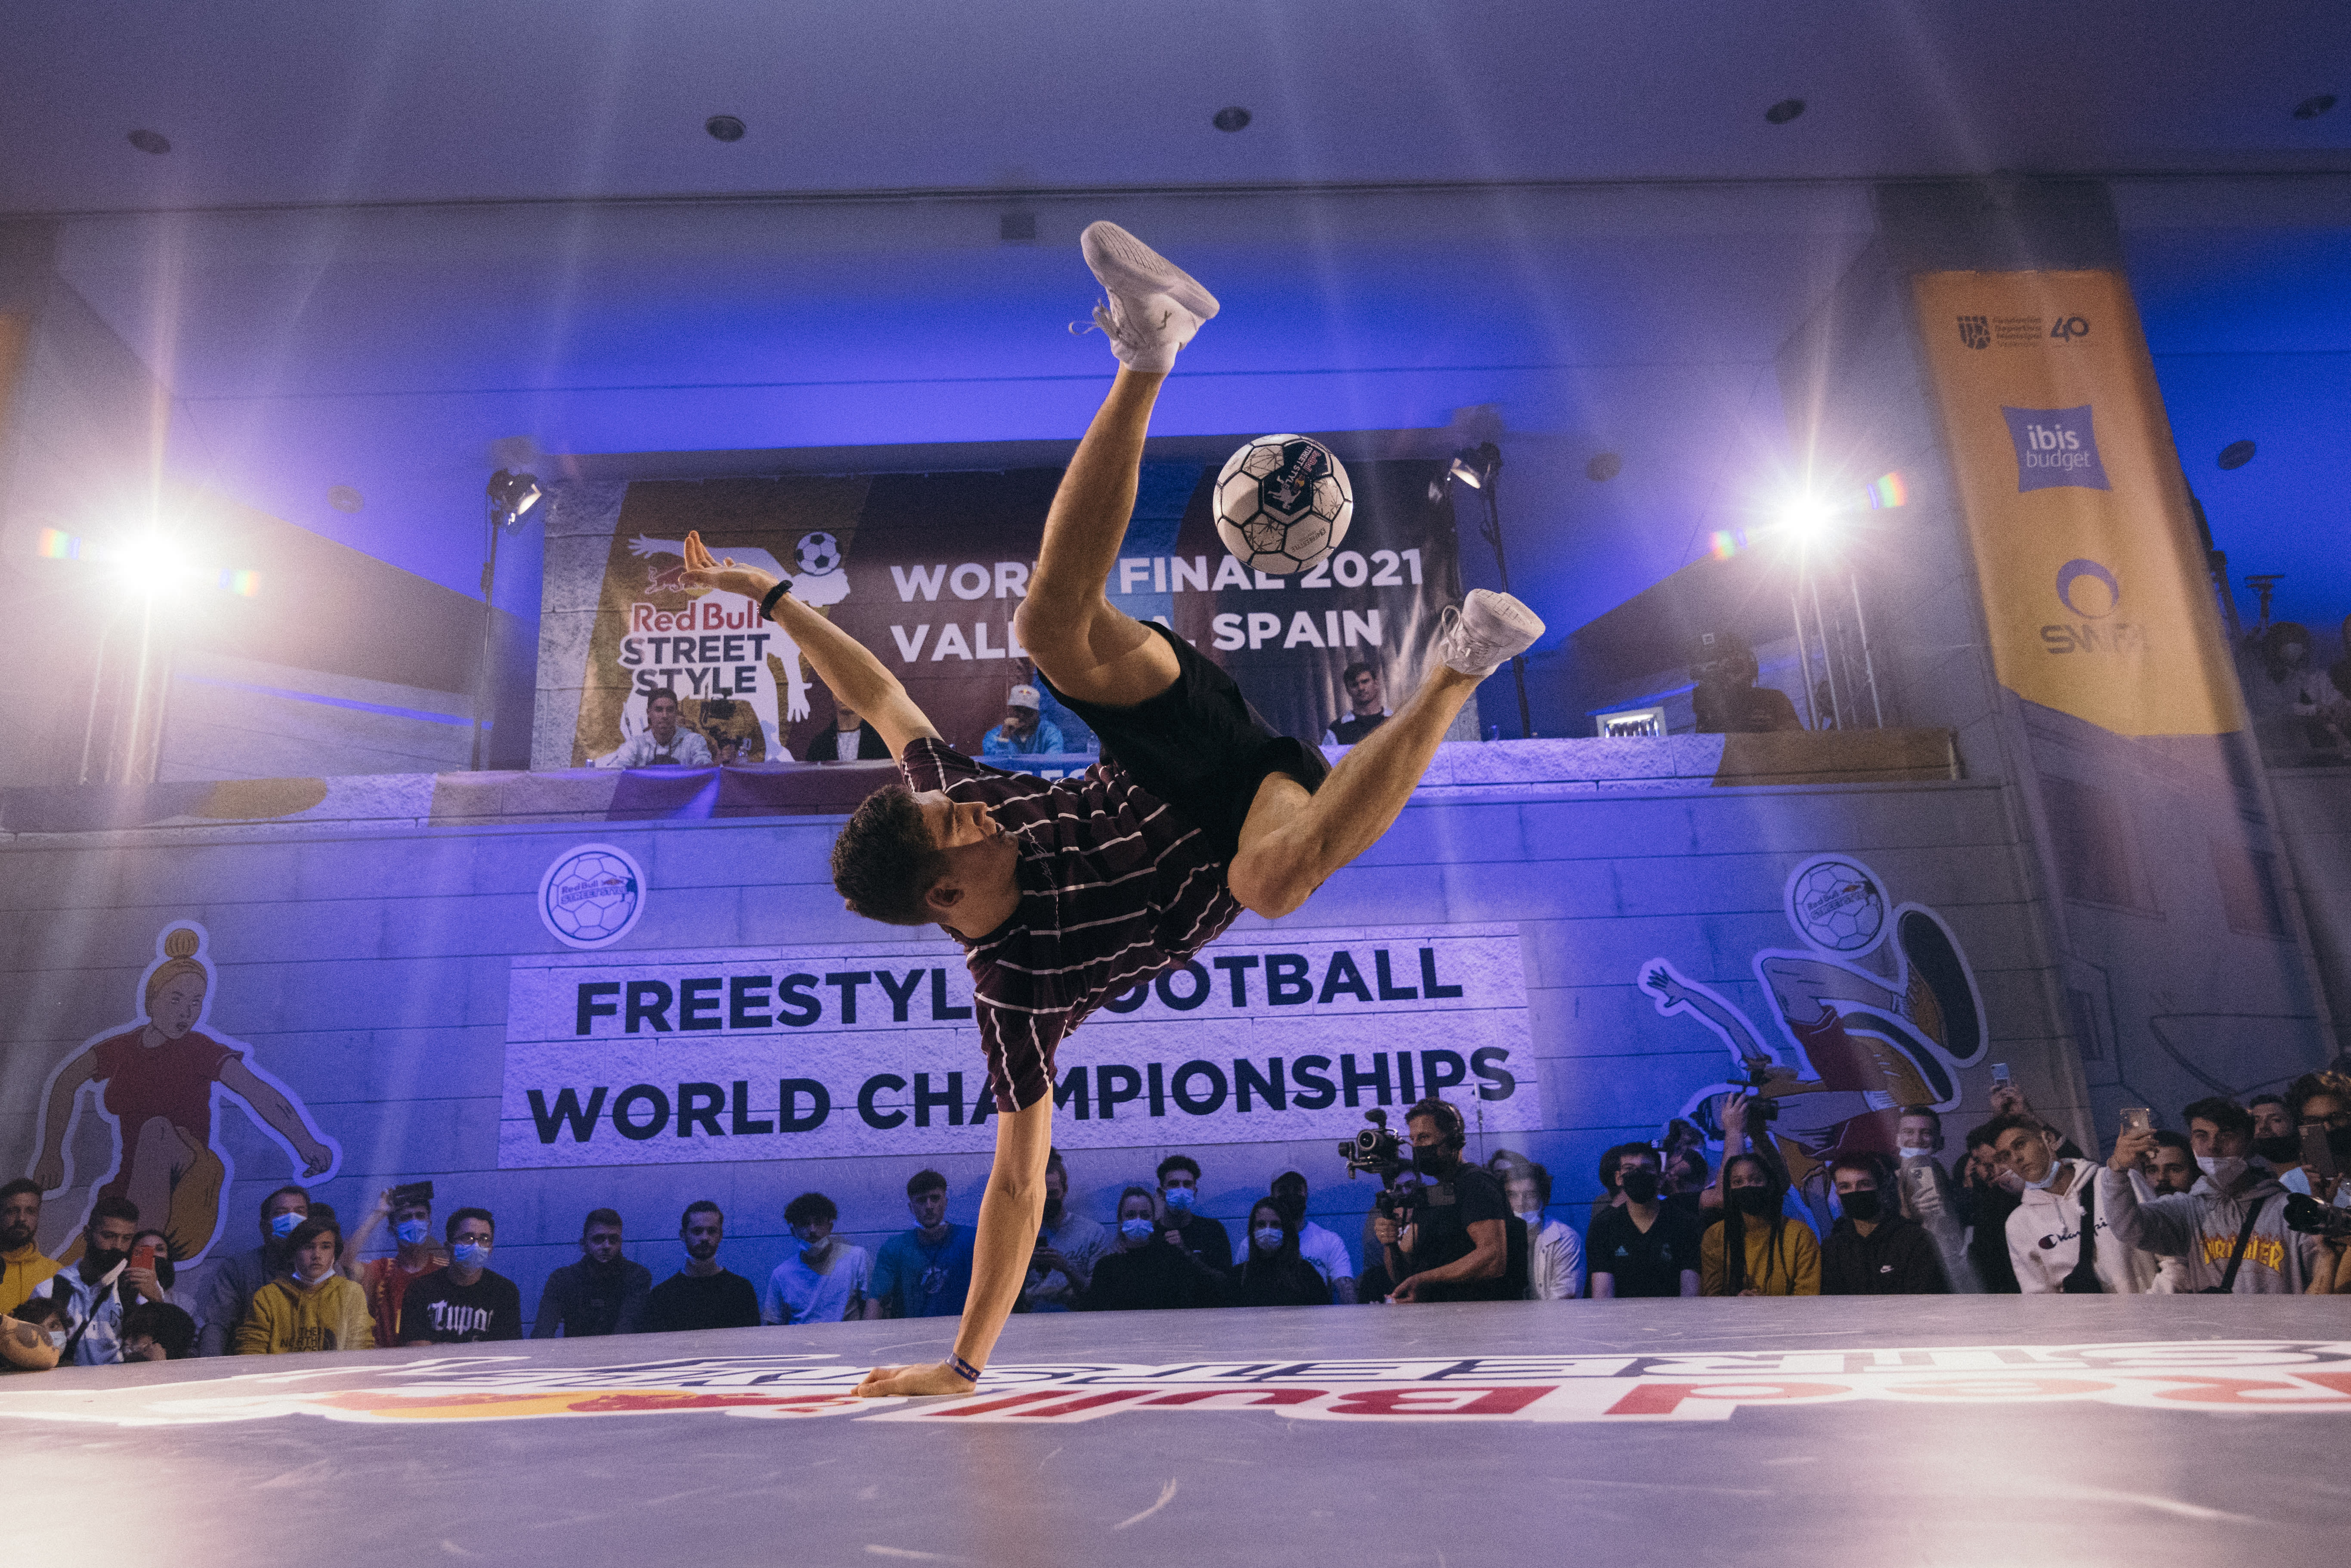 Red Bull Street Style 2021: World Final report/results